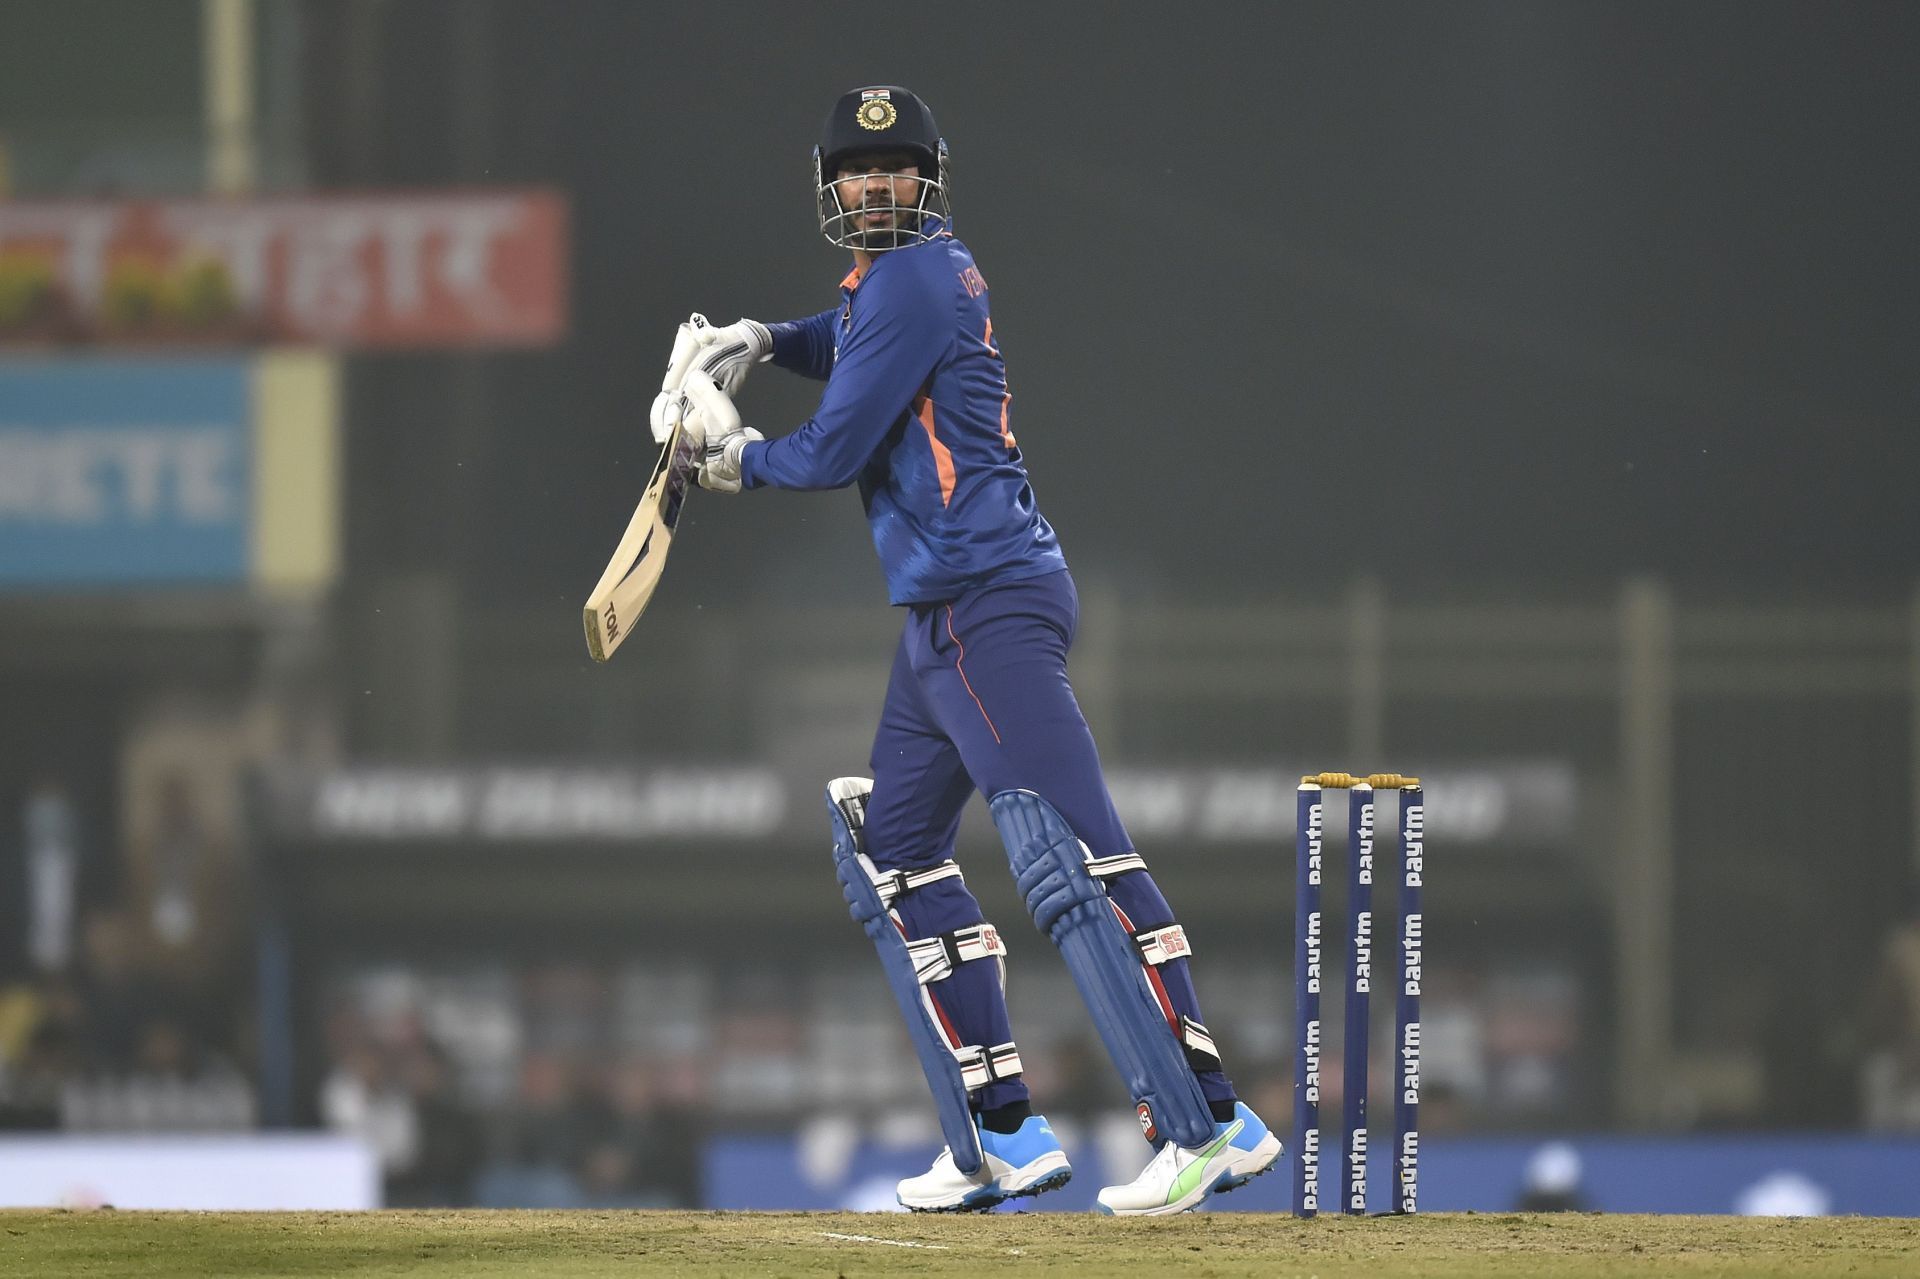 Venkatesh Iyer stood out in the T20I series against the West Indies